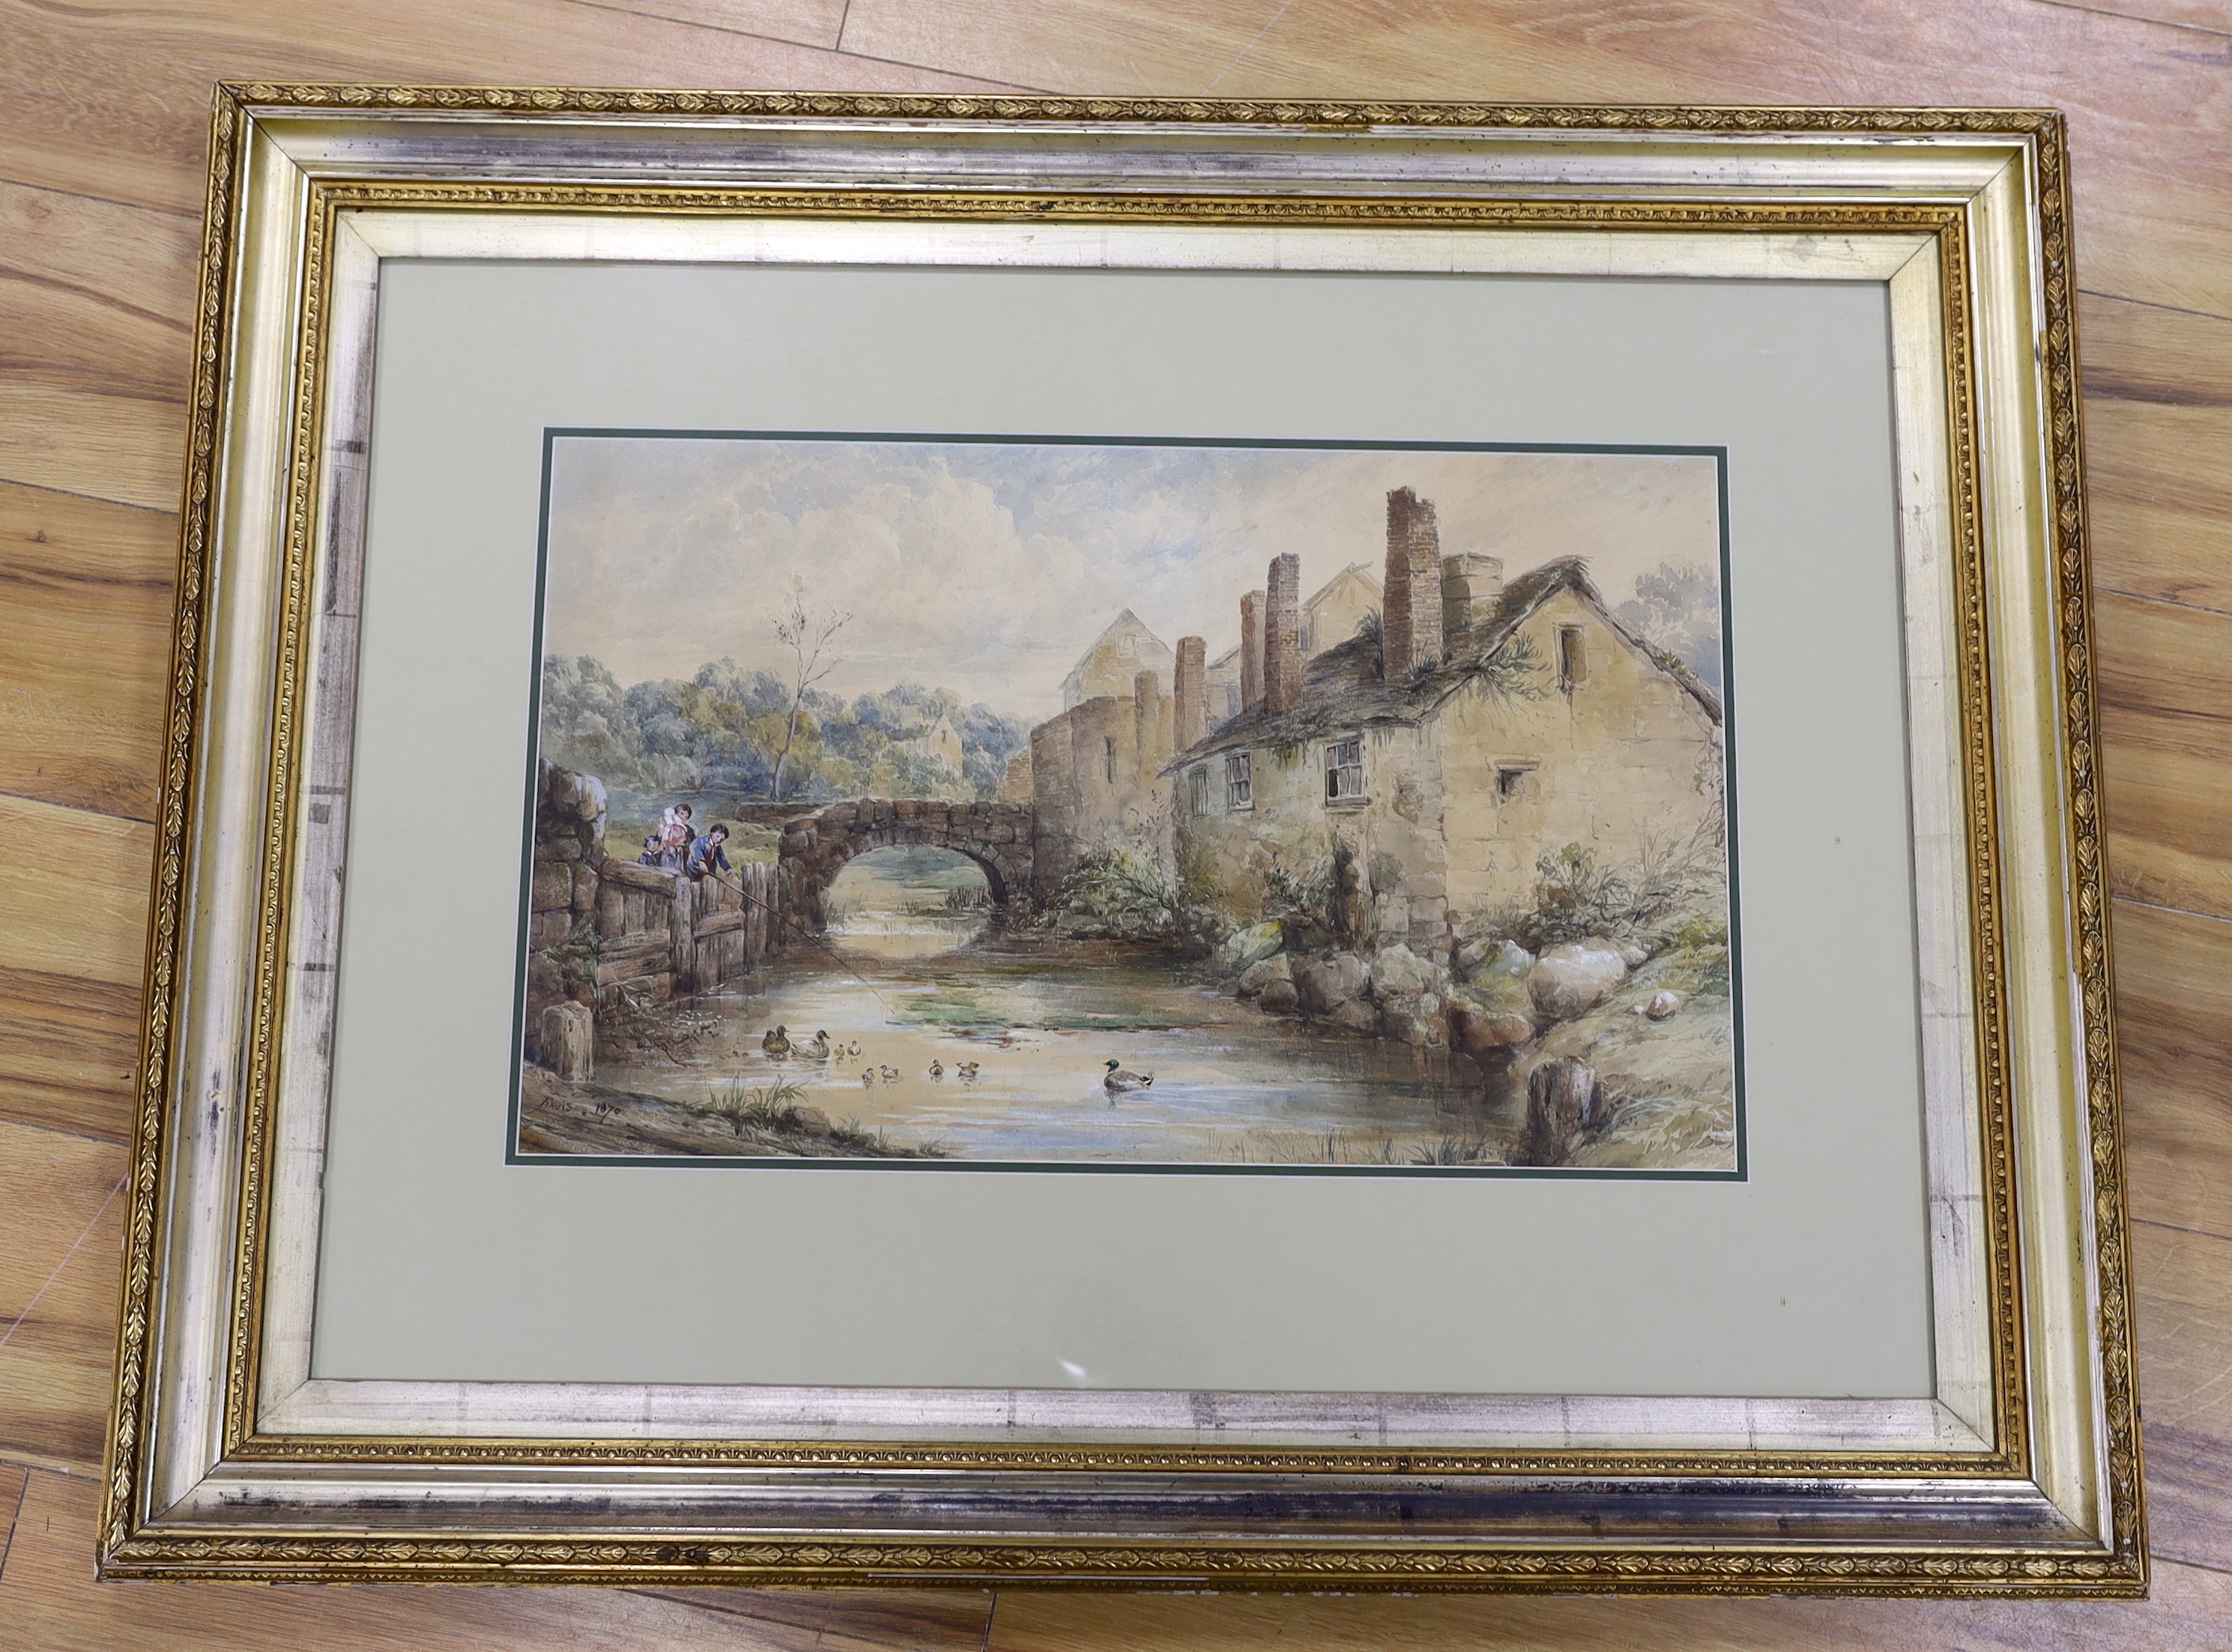 Frederick Davis (fl.1853-1892), watercolour, Bridge over stream with children fishing, signed and dated 1870, 36 x 59cm